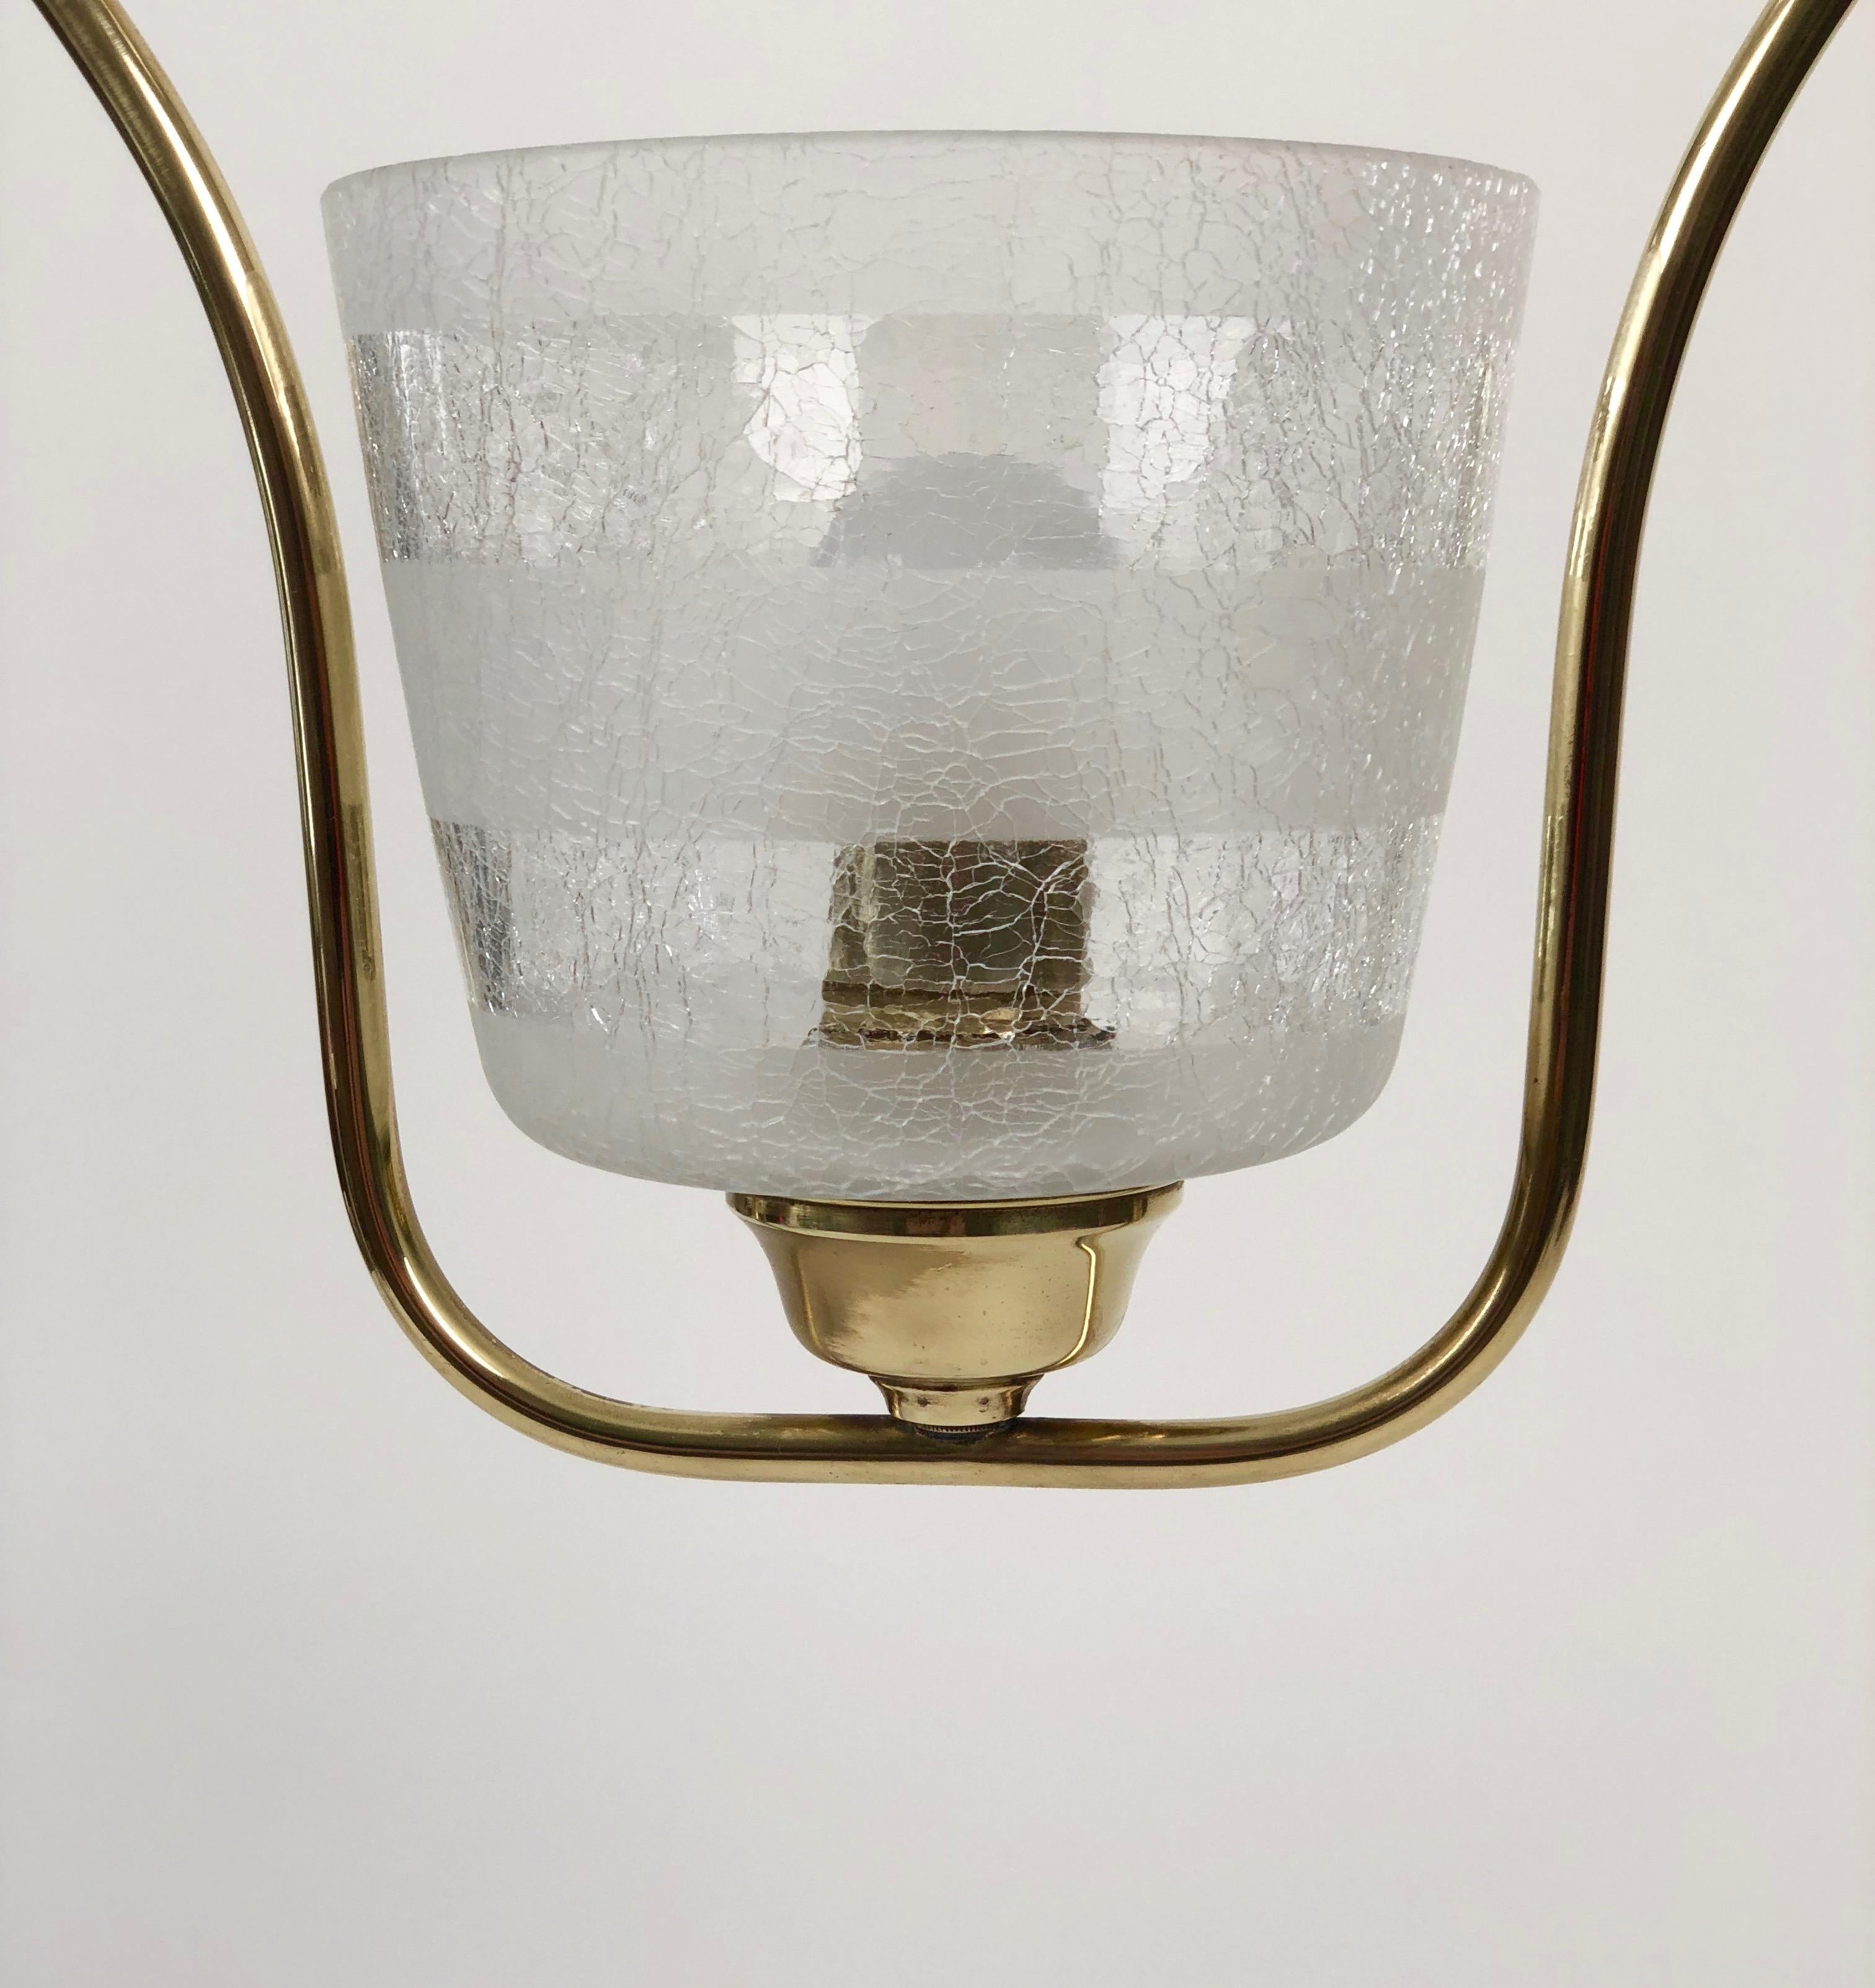 Hollywood Regency Styled Pendant Lamp in Brass and Glass, from Austria, 1950s For Sale 5